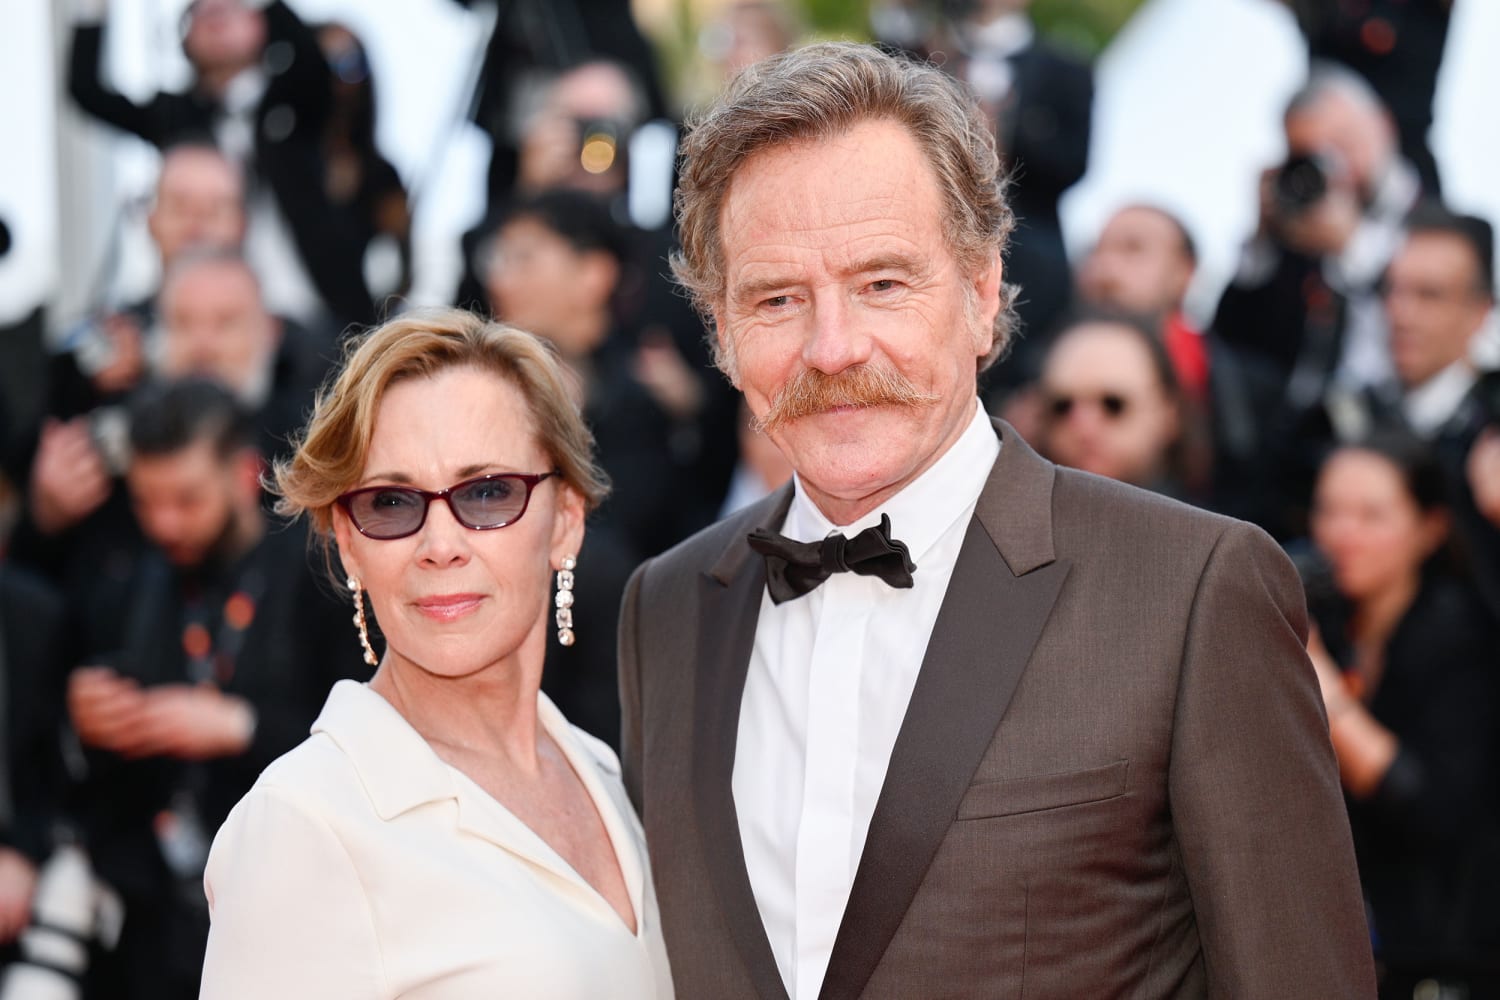 Bryan Cranston will retire from acting in 2026 to spend time with wife